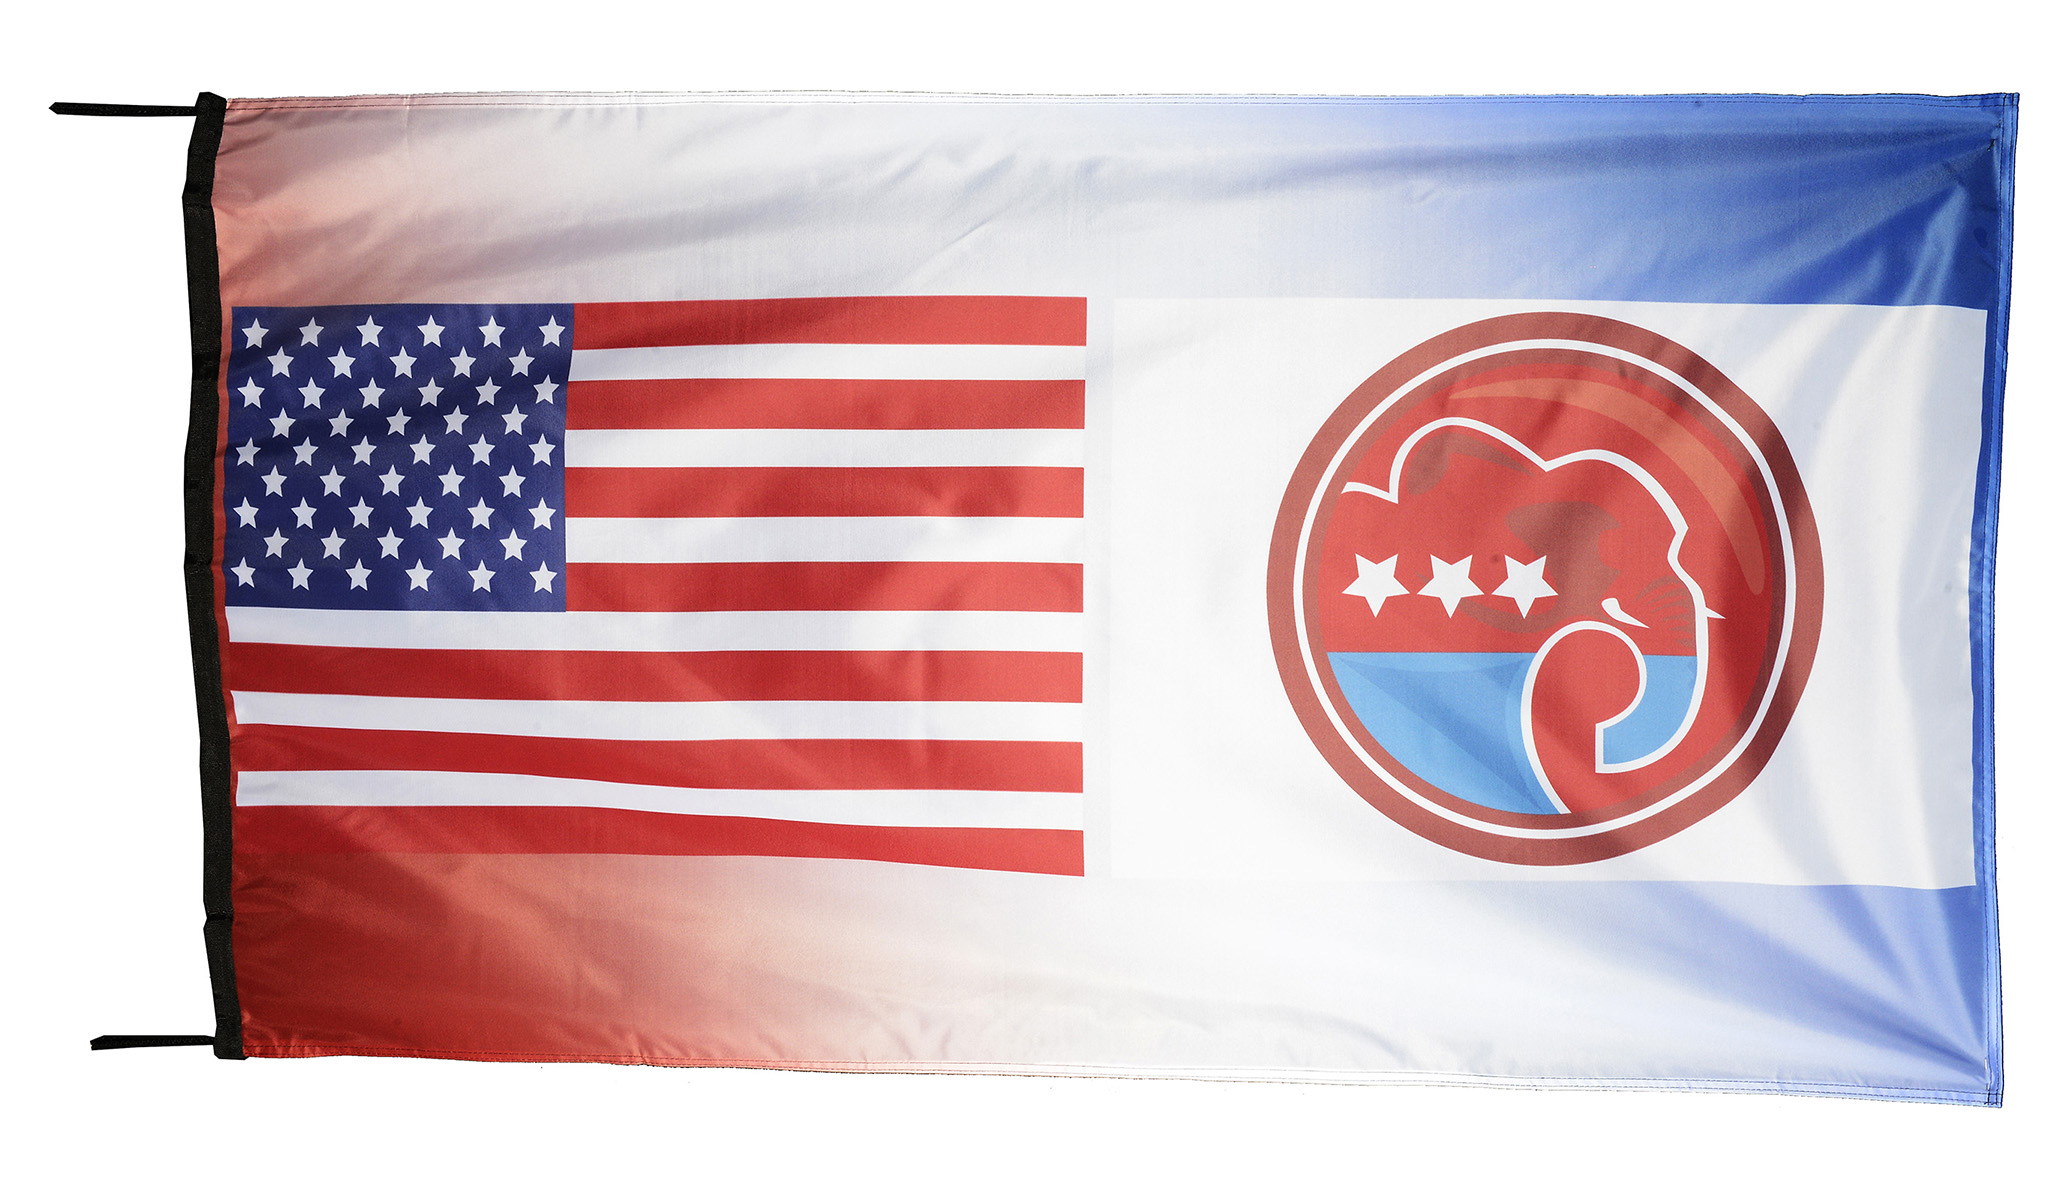 Flag  079 USA / US Country / United States Of America and Democrats Party / Senators / Congress / Washington / White House / Capitol / Politics / Presidential / Elections / Washington / Pride Hybrid Weather-Resistant Polyester Outdoor Flag Landscape Banner / Vivid Colors / 3 X 5 FT (150 x 90cm) International Flags for Sale